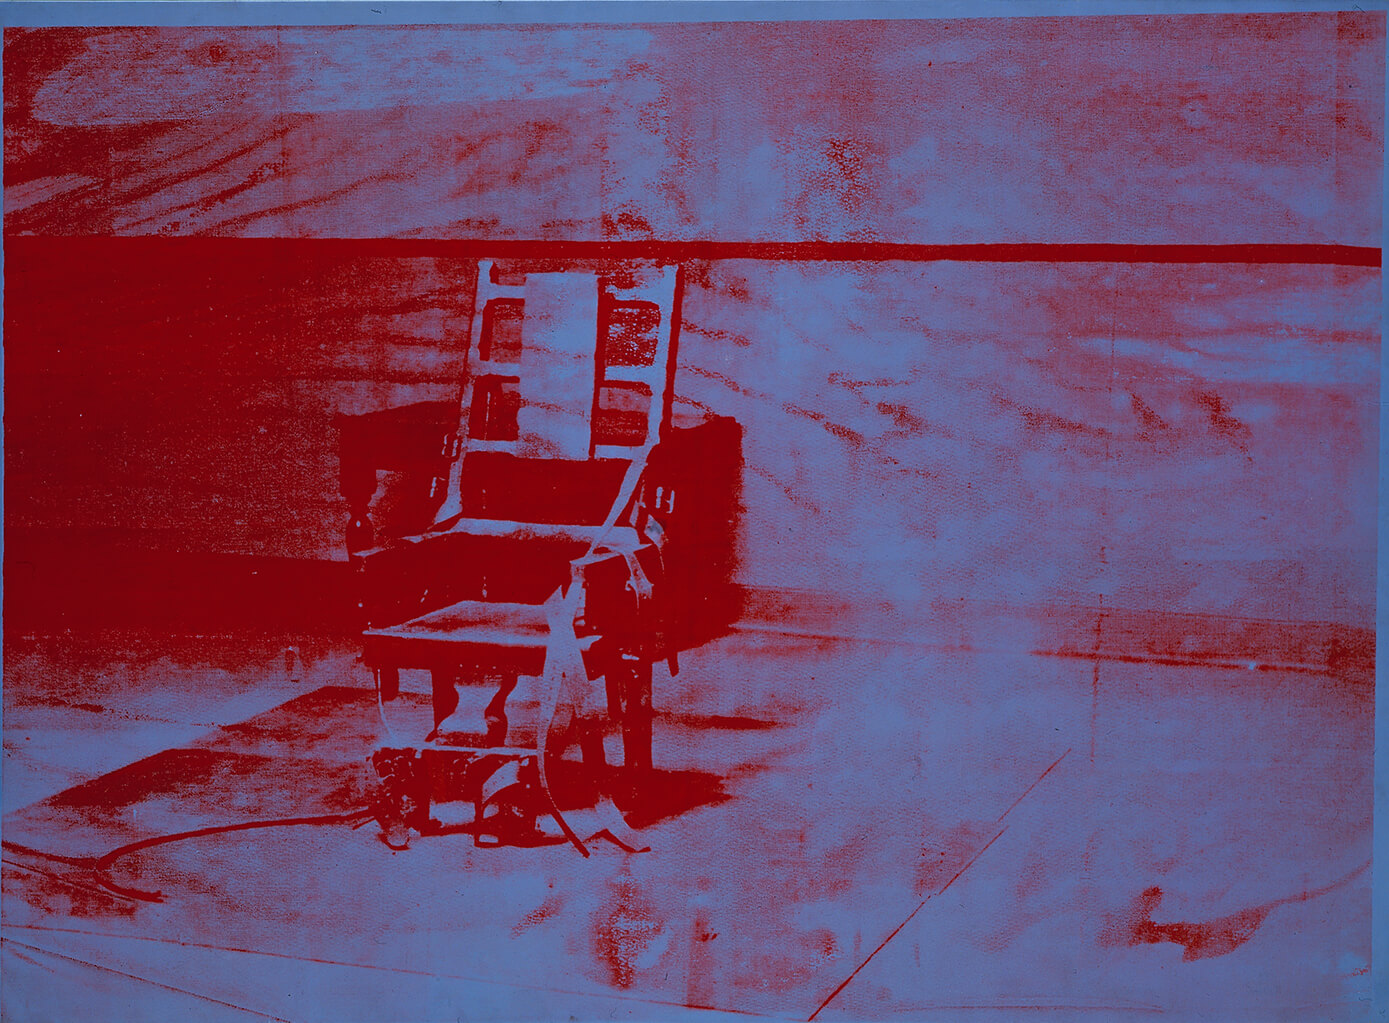 Andy Warhol (1928-1987), Big Electric Chair, 1967. © The Menil Collection, Houston. Photo by Hickey-Robertson, Houston. © The Andy Warhol Foundation for the Visual Arts, Inc. / ADAGP, Paris 2015.